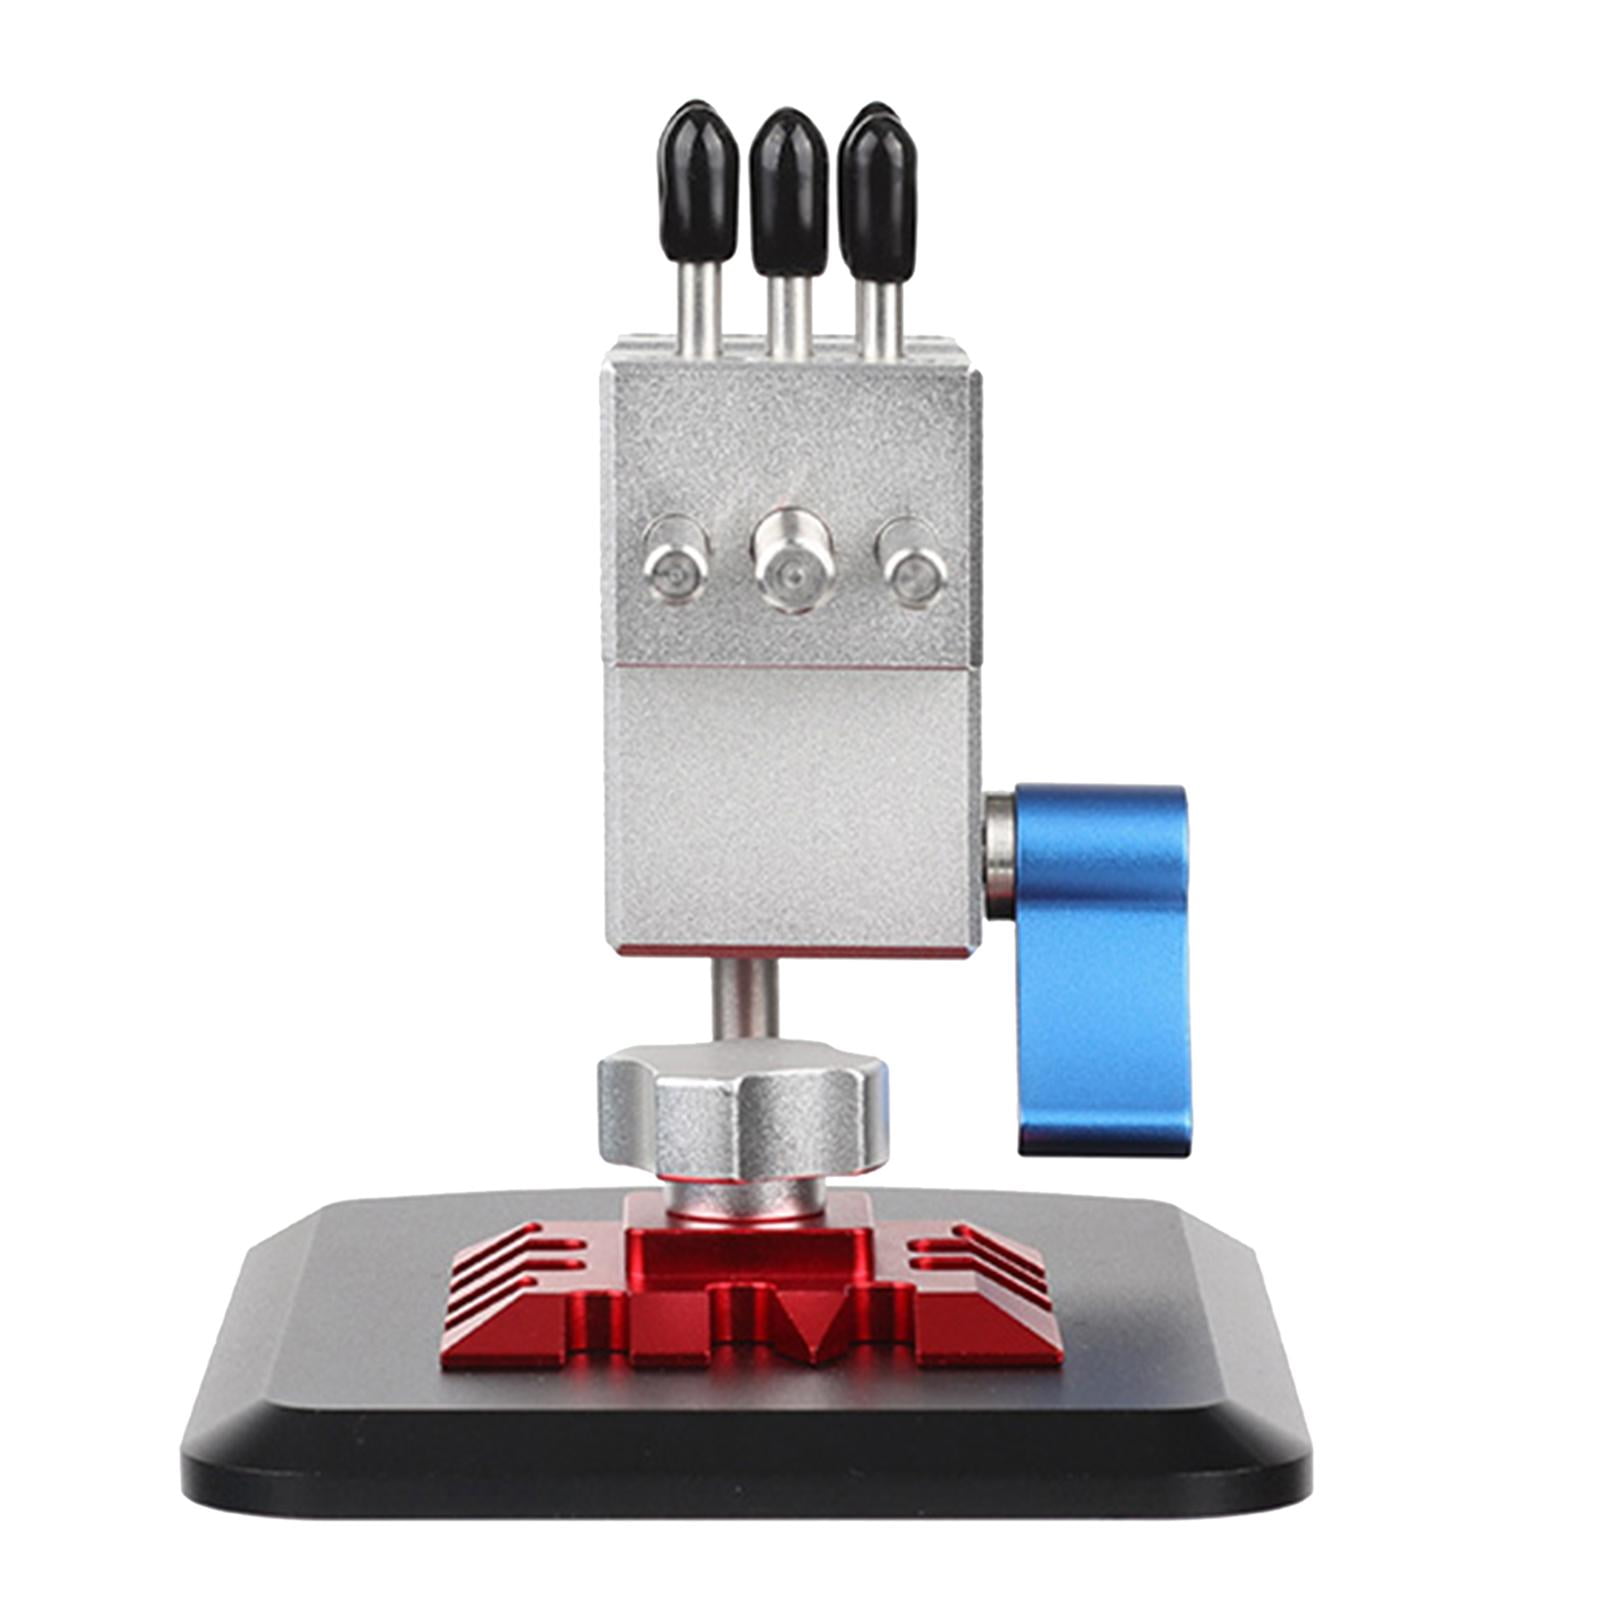 DSPIAE AT-HVA Precision Stainless Steel Clamp Vise 360° Unviersal Tool  Holder For Gundam Military Model Making DIY Tools